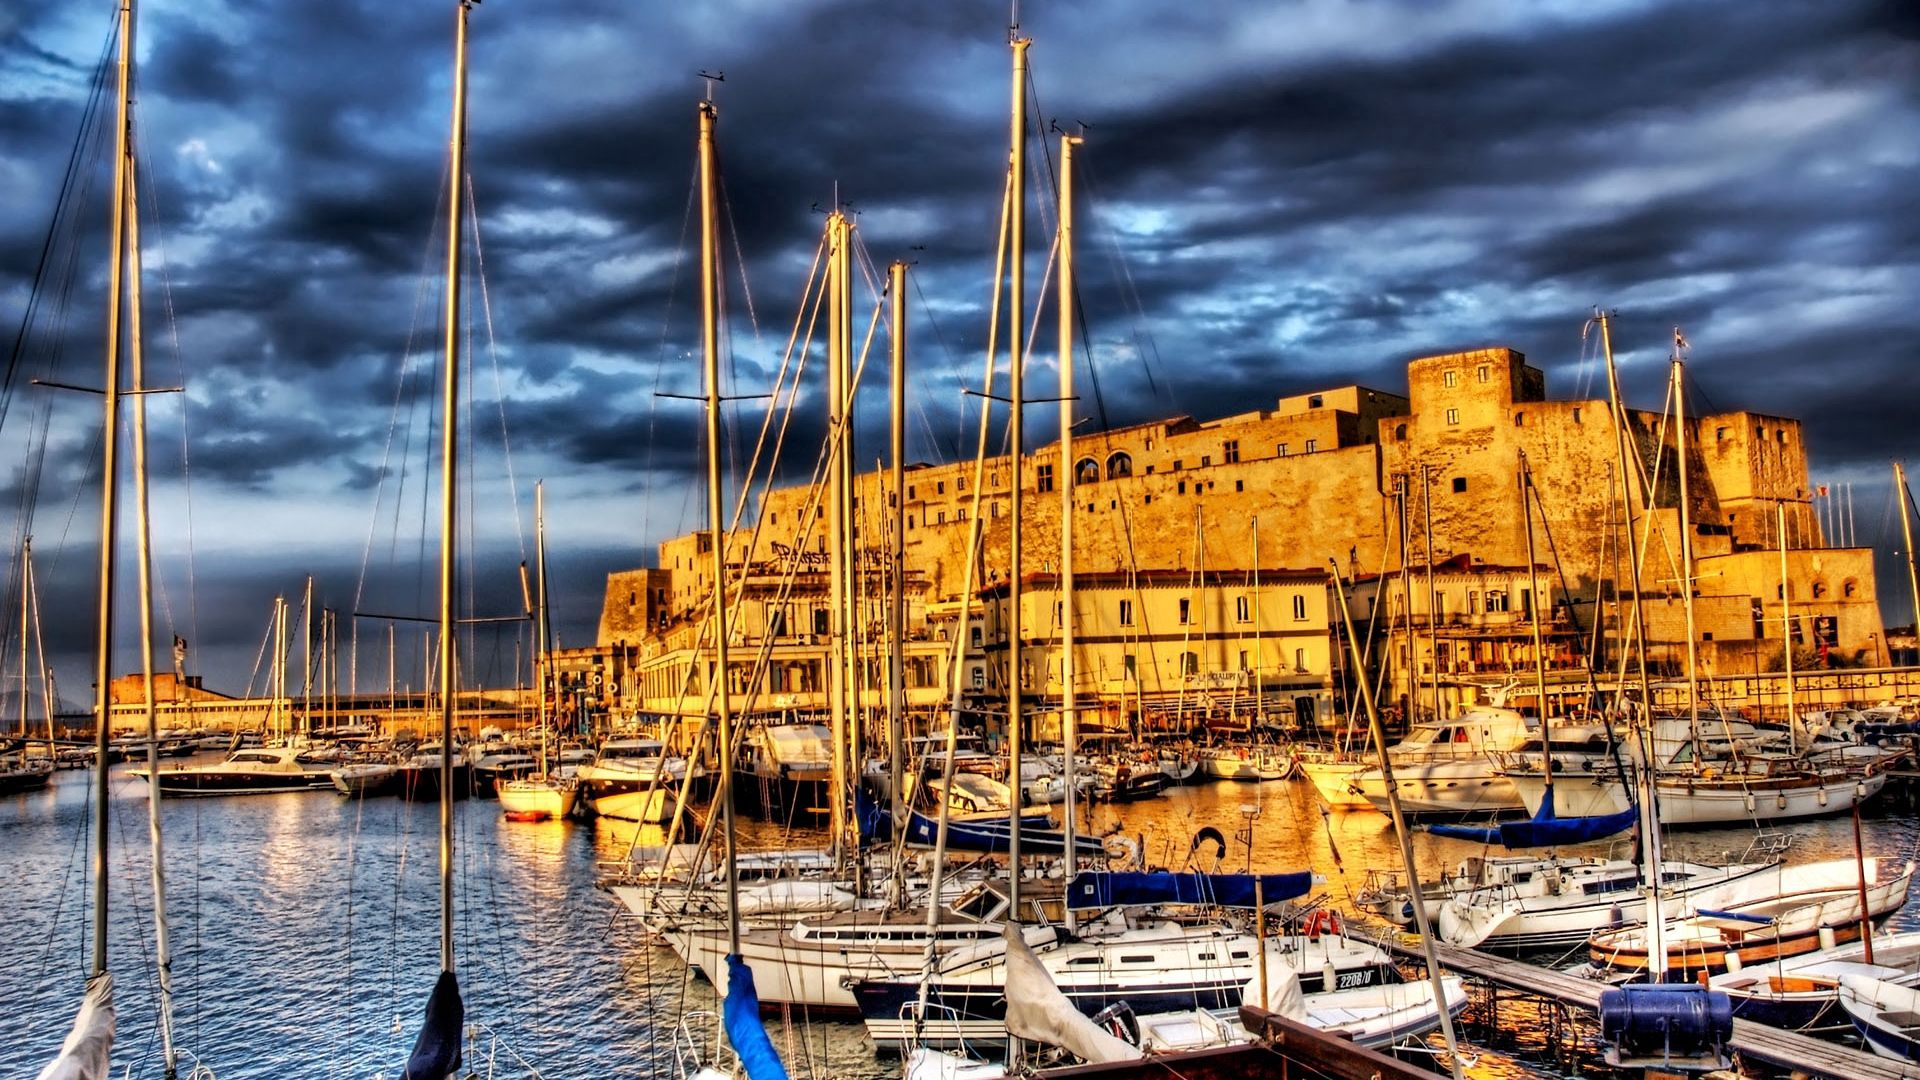 boats, cities, yachts, building, pier, france, hdr, terra minor images